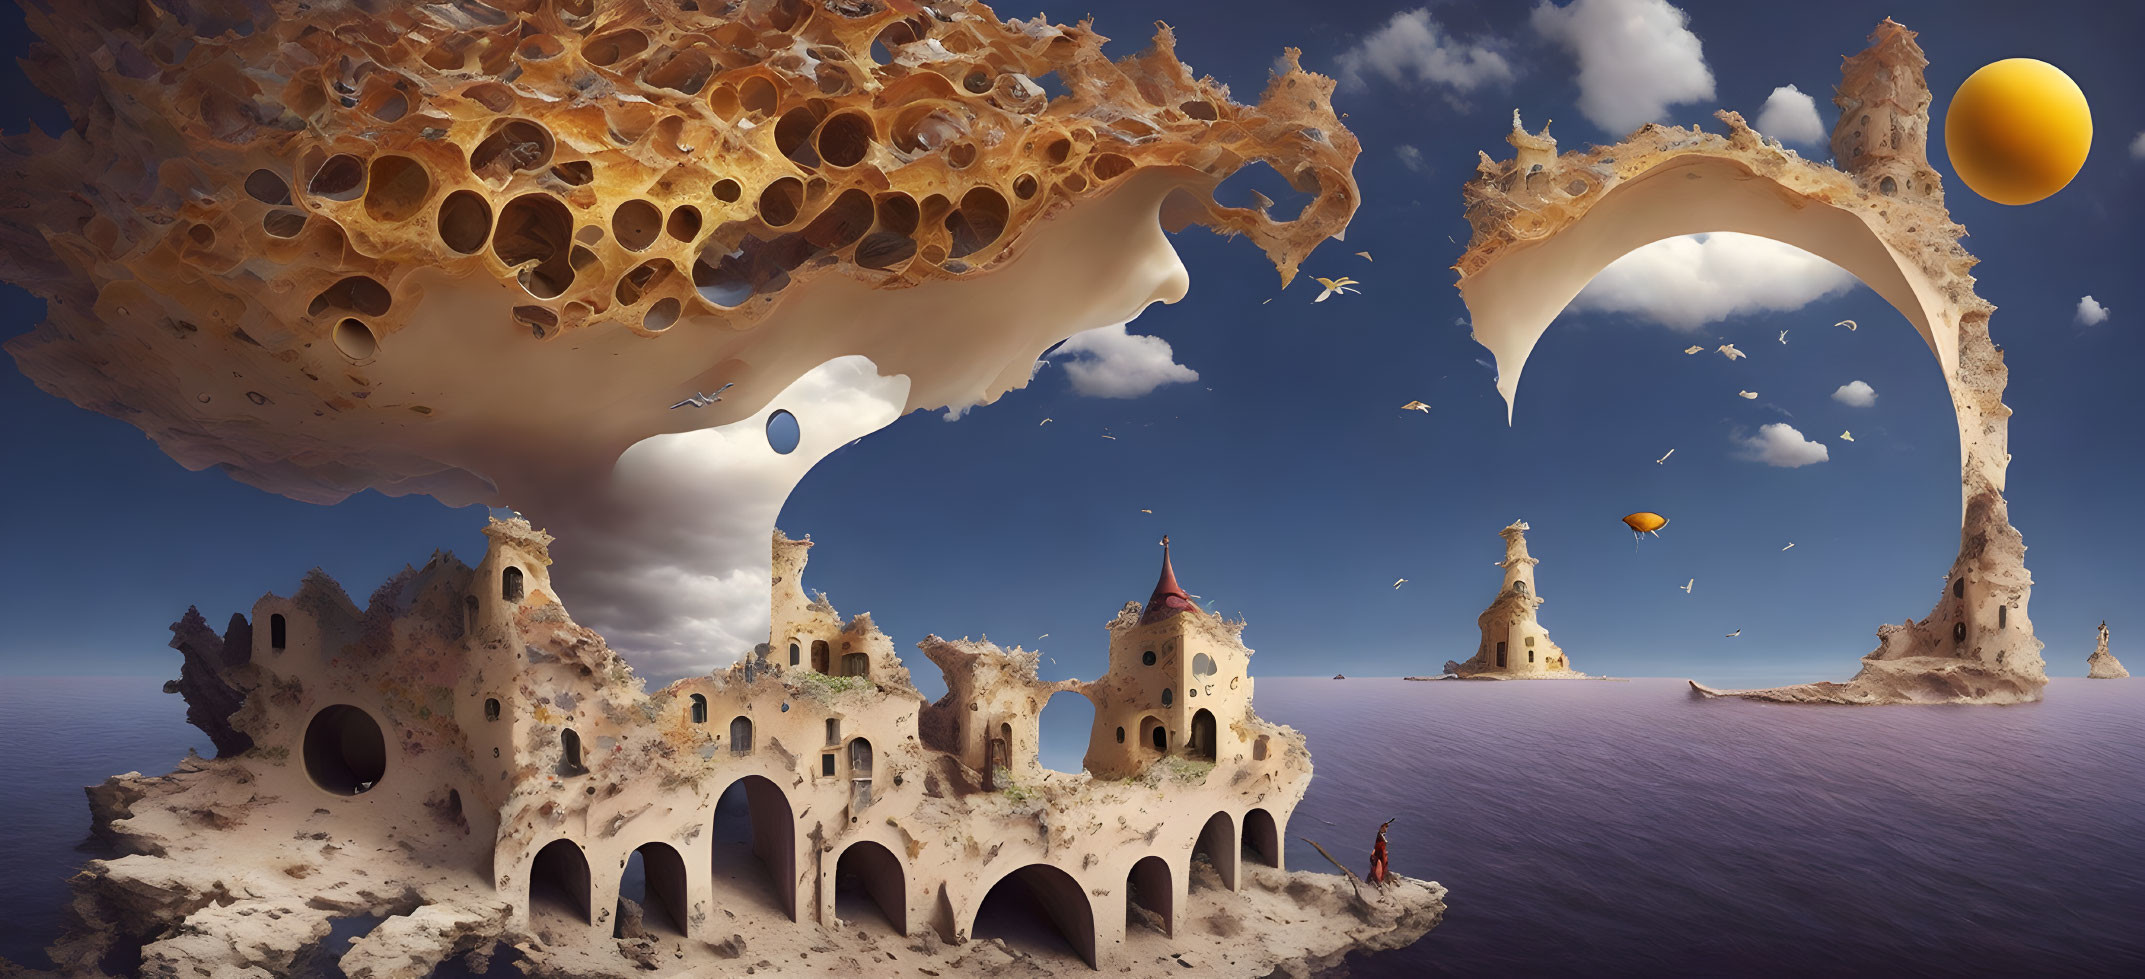 Surreal landscape with honeycomb-like rocks, floating islands, hot air balloons, calm sea,